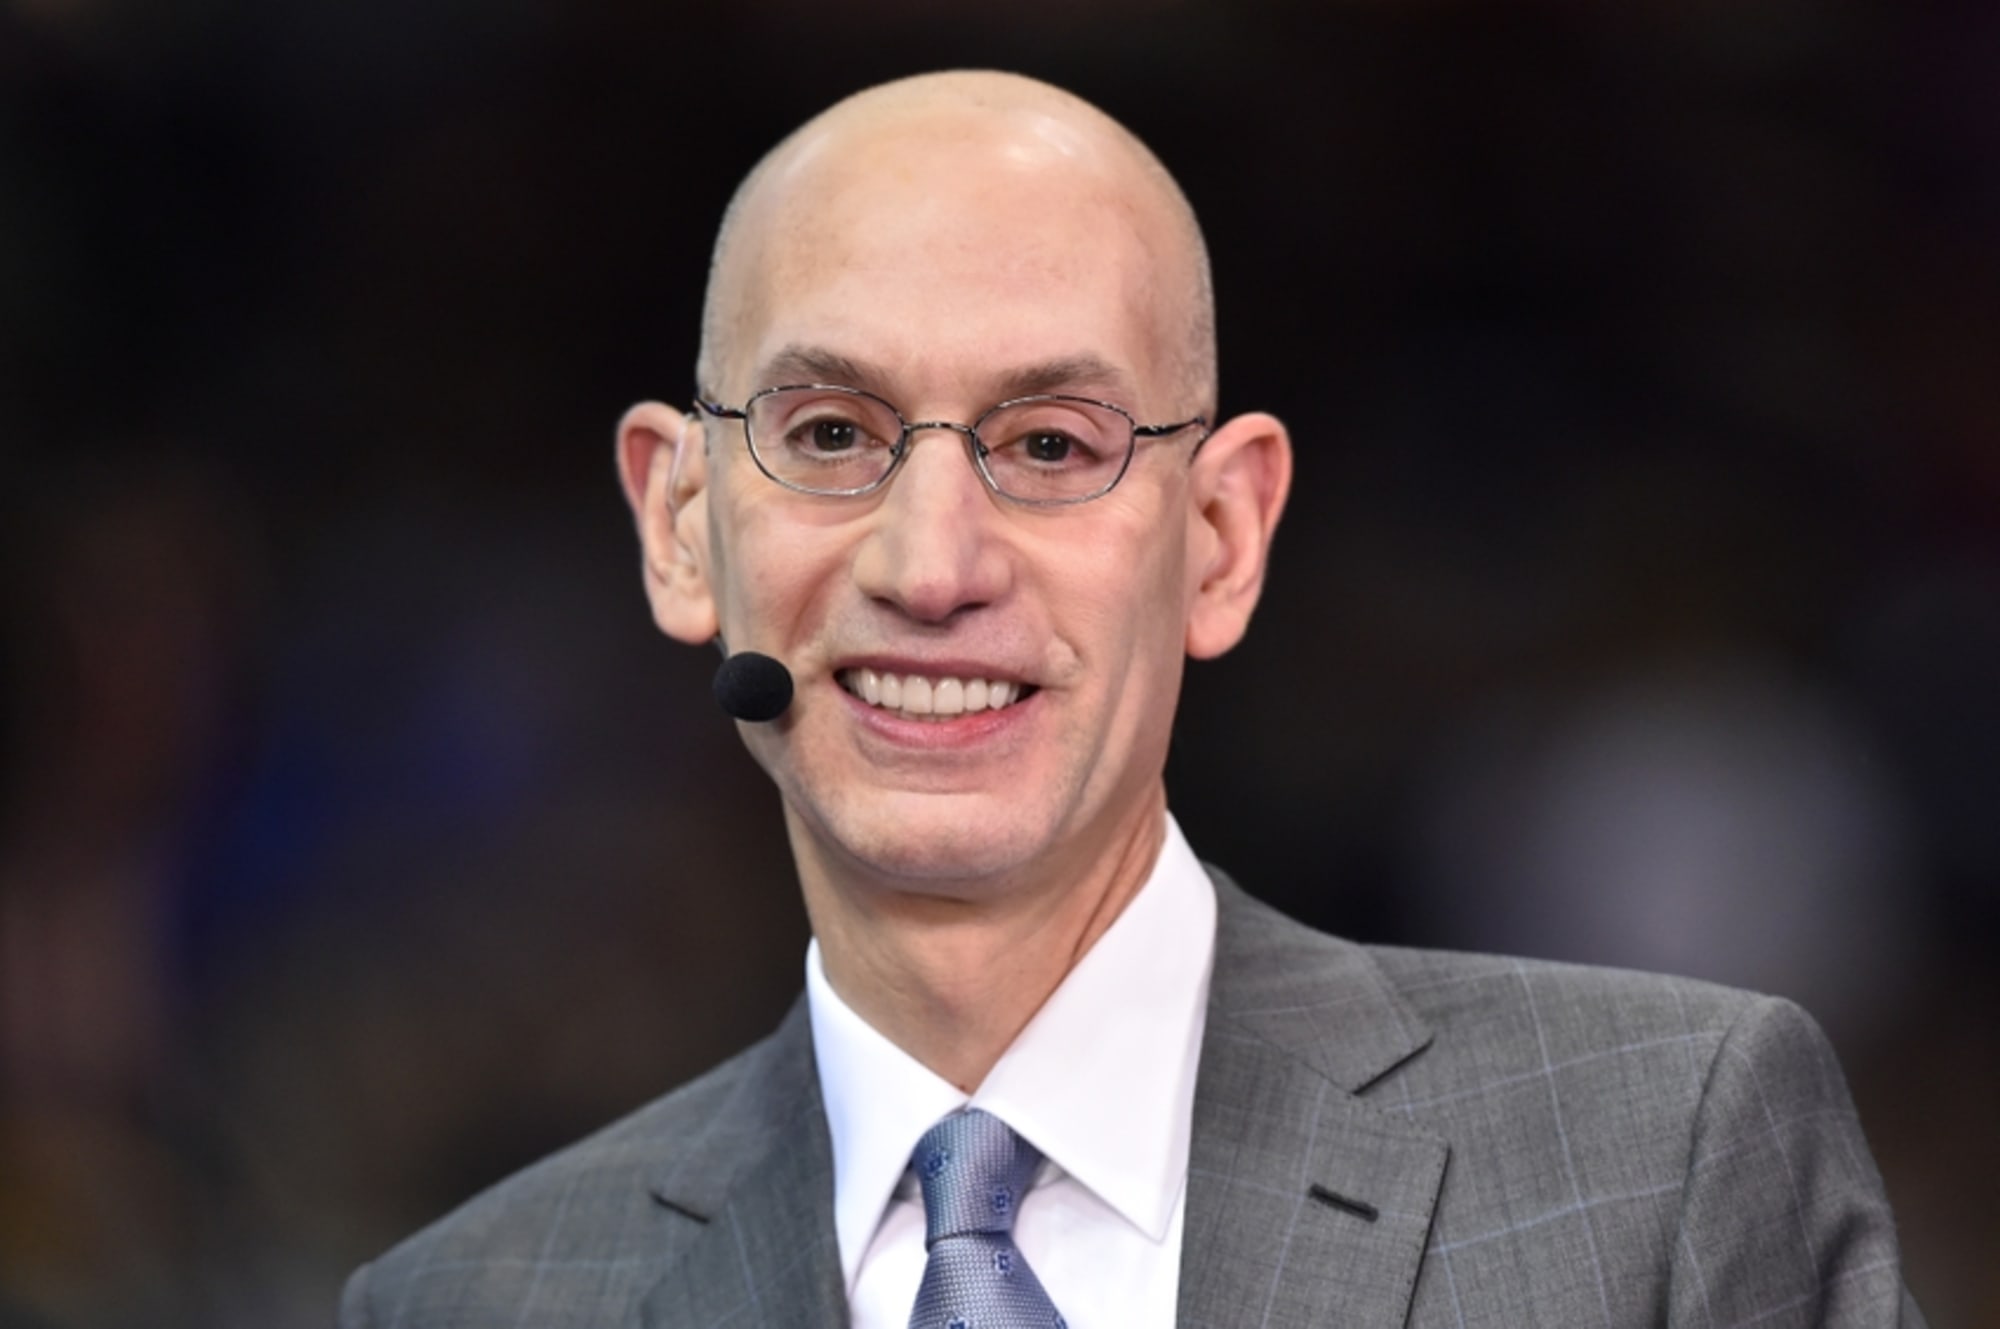 Jun 11, 2015; Cleveland, OH, USA; NBA commissioner Adam Silver during the second quarter of game four of the NBA Finals between the Cleveland Cavaliers and the Golden State Warriors at Quicken Loans Arena. Mandatory Credit: David Richard-USA TODAY Sports